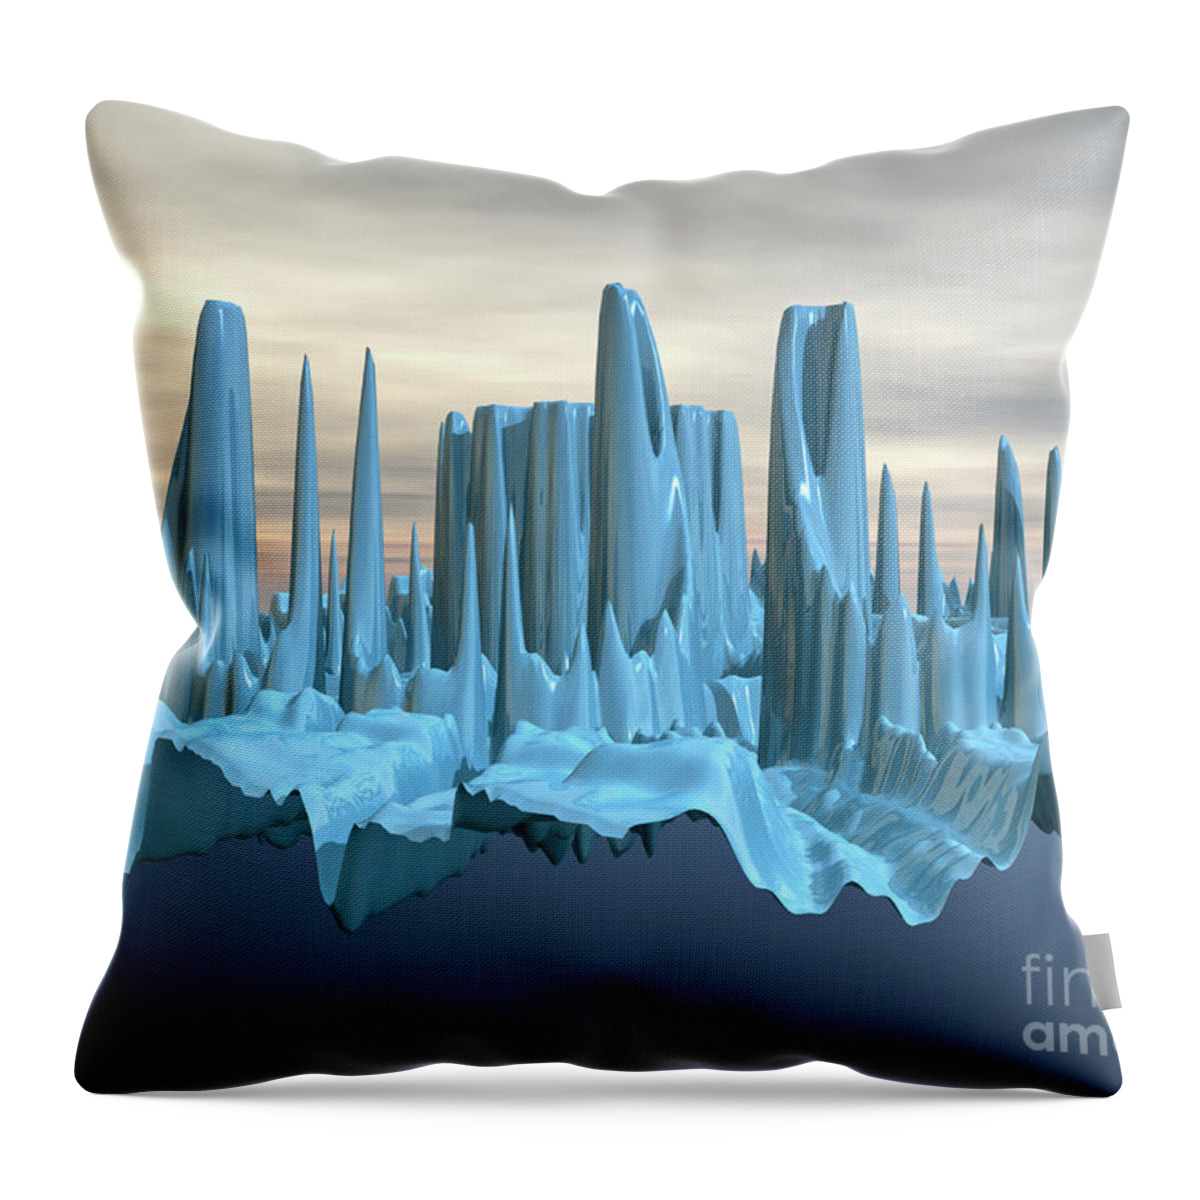 Fractal Throw Pillow featuring the digital art Abstract Fractal by Phil Perkins